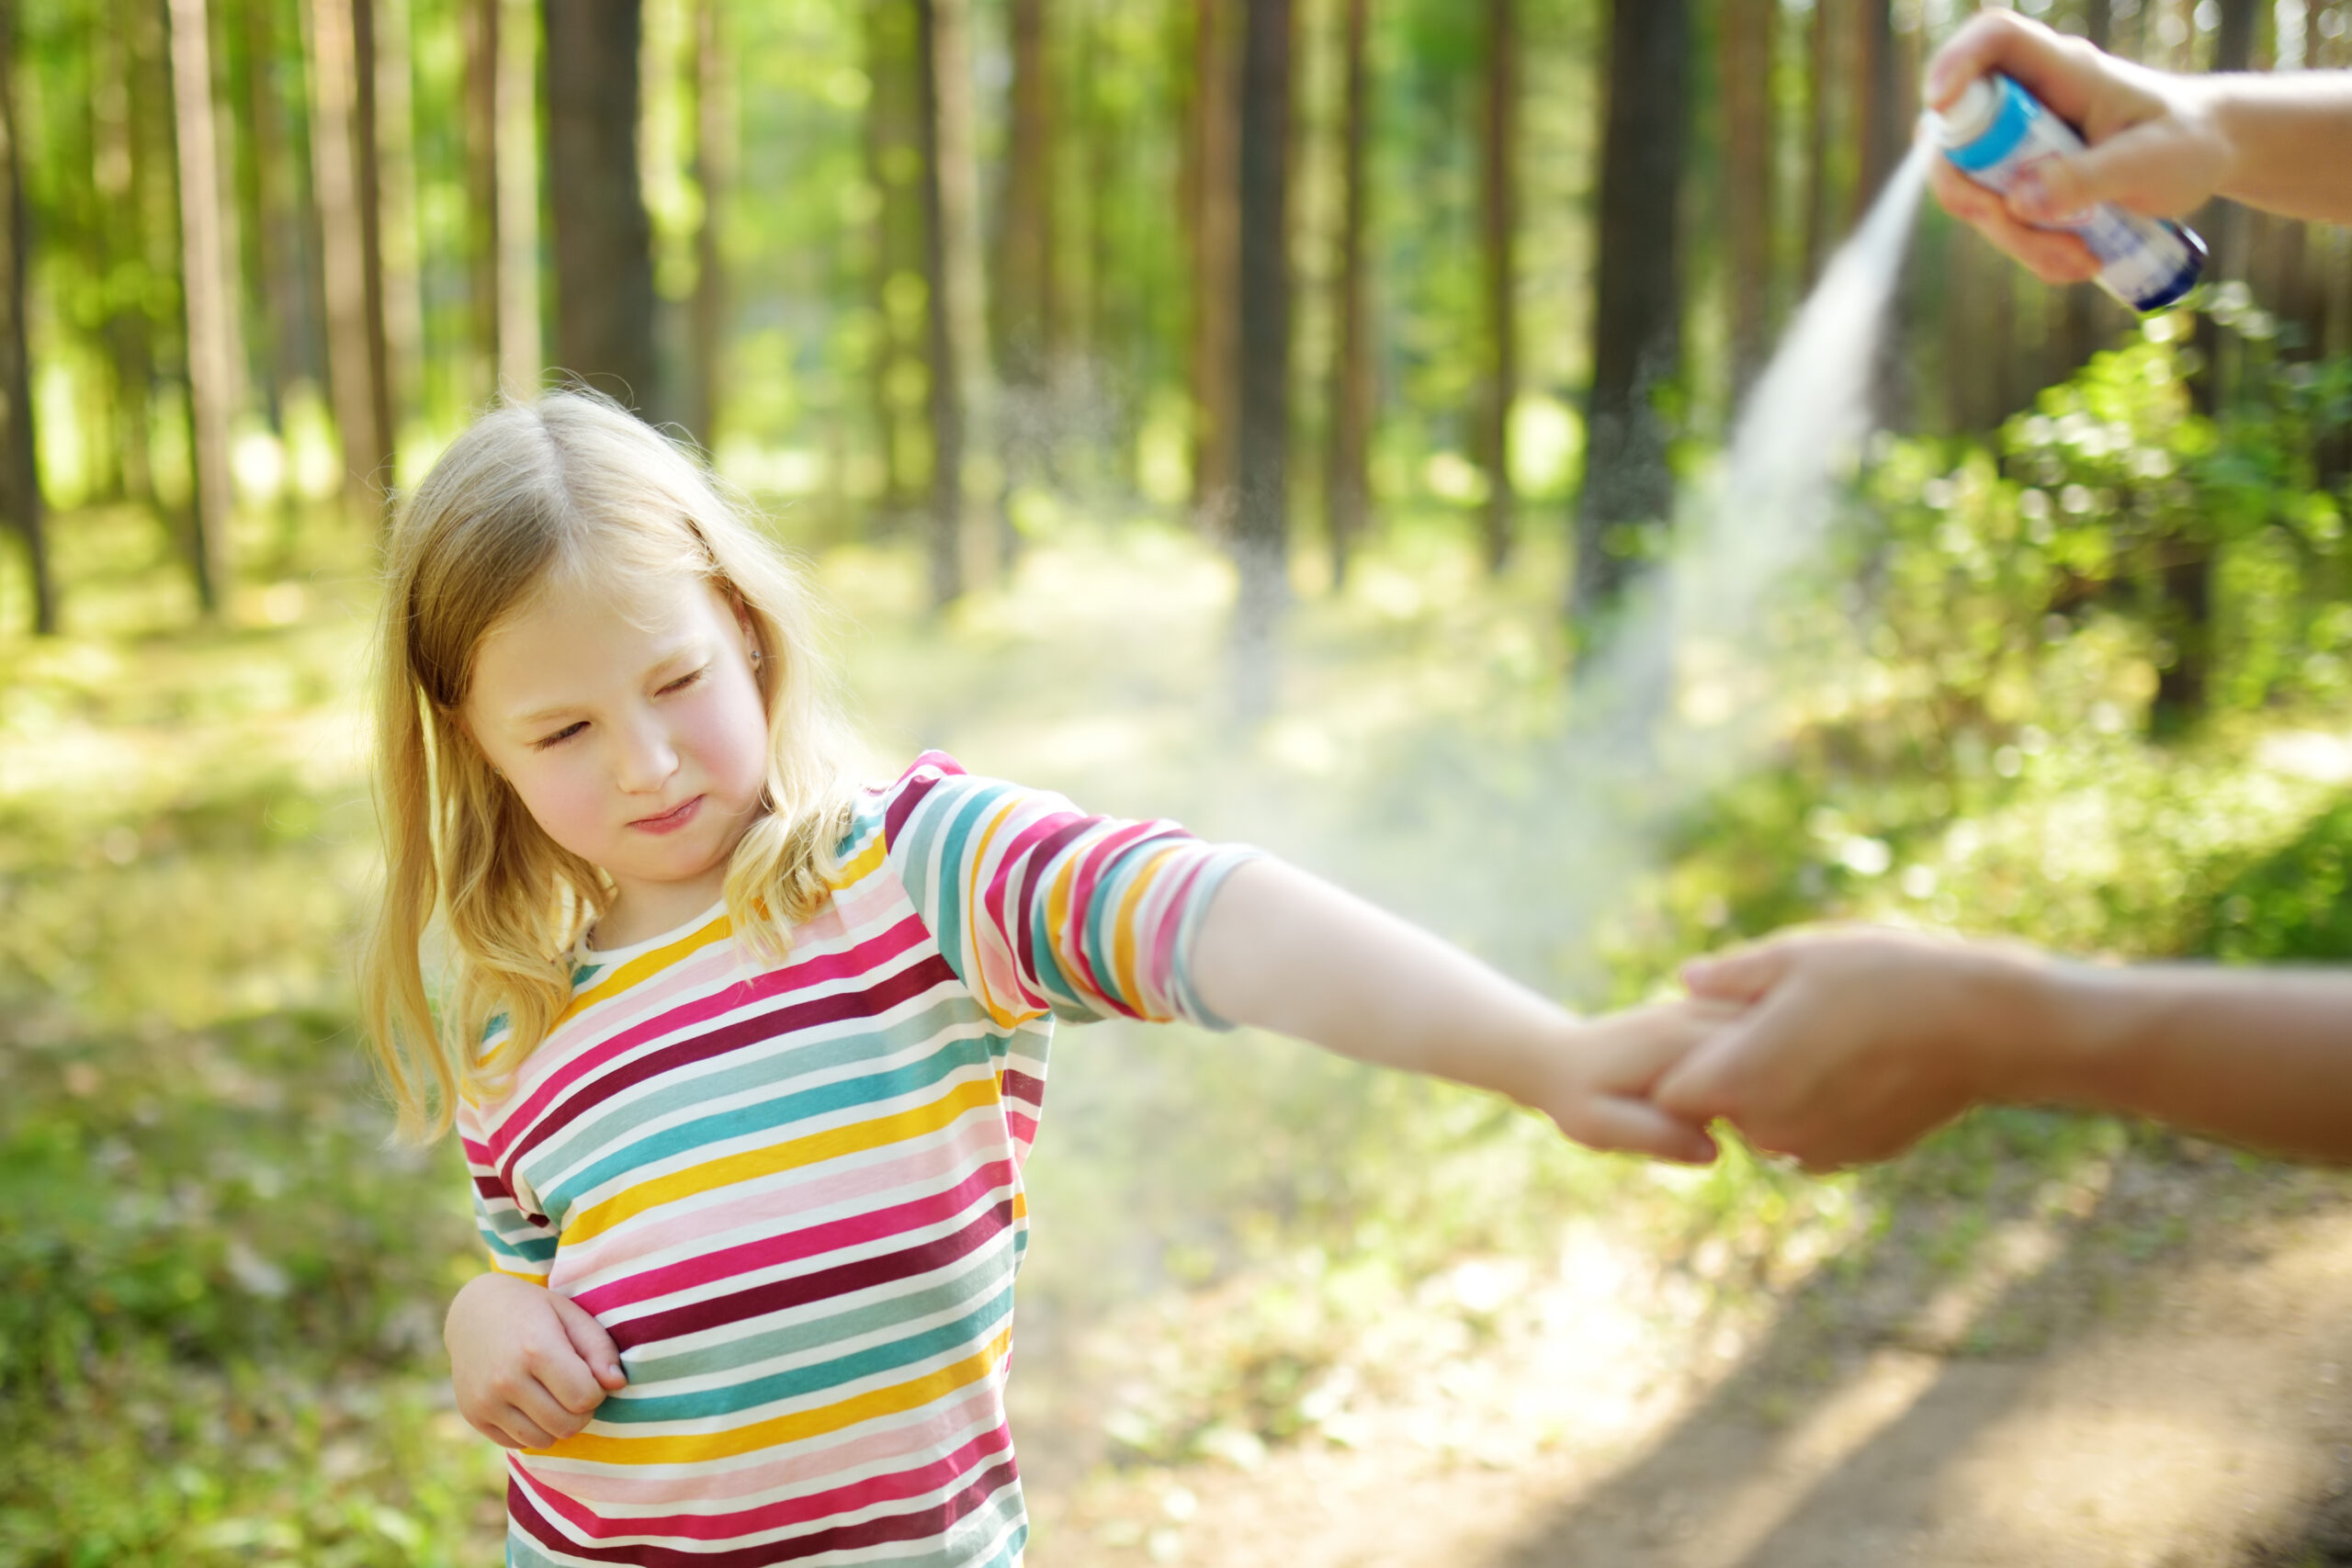 Hands of adult spraying little girl’s arm with insect repellent before a walk in the woods